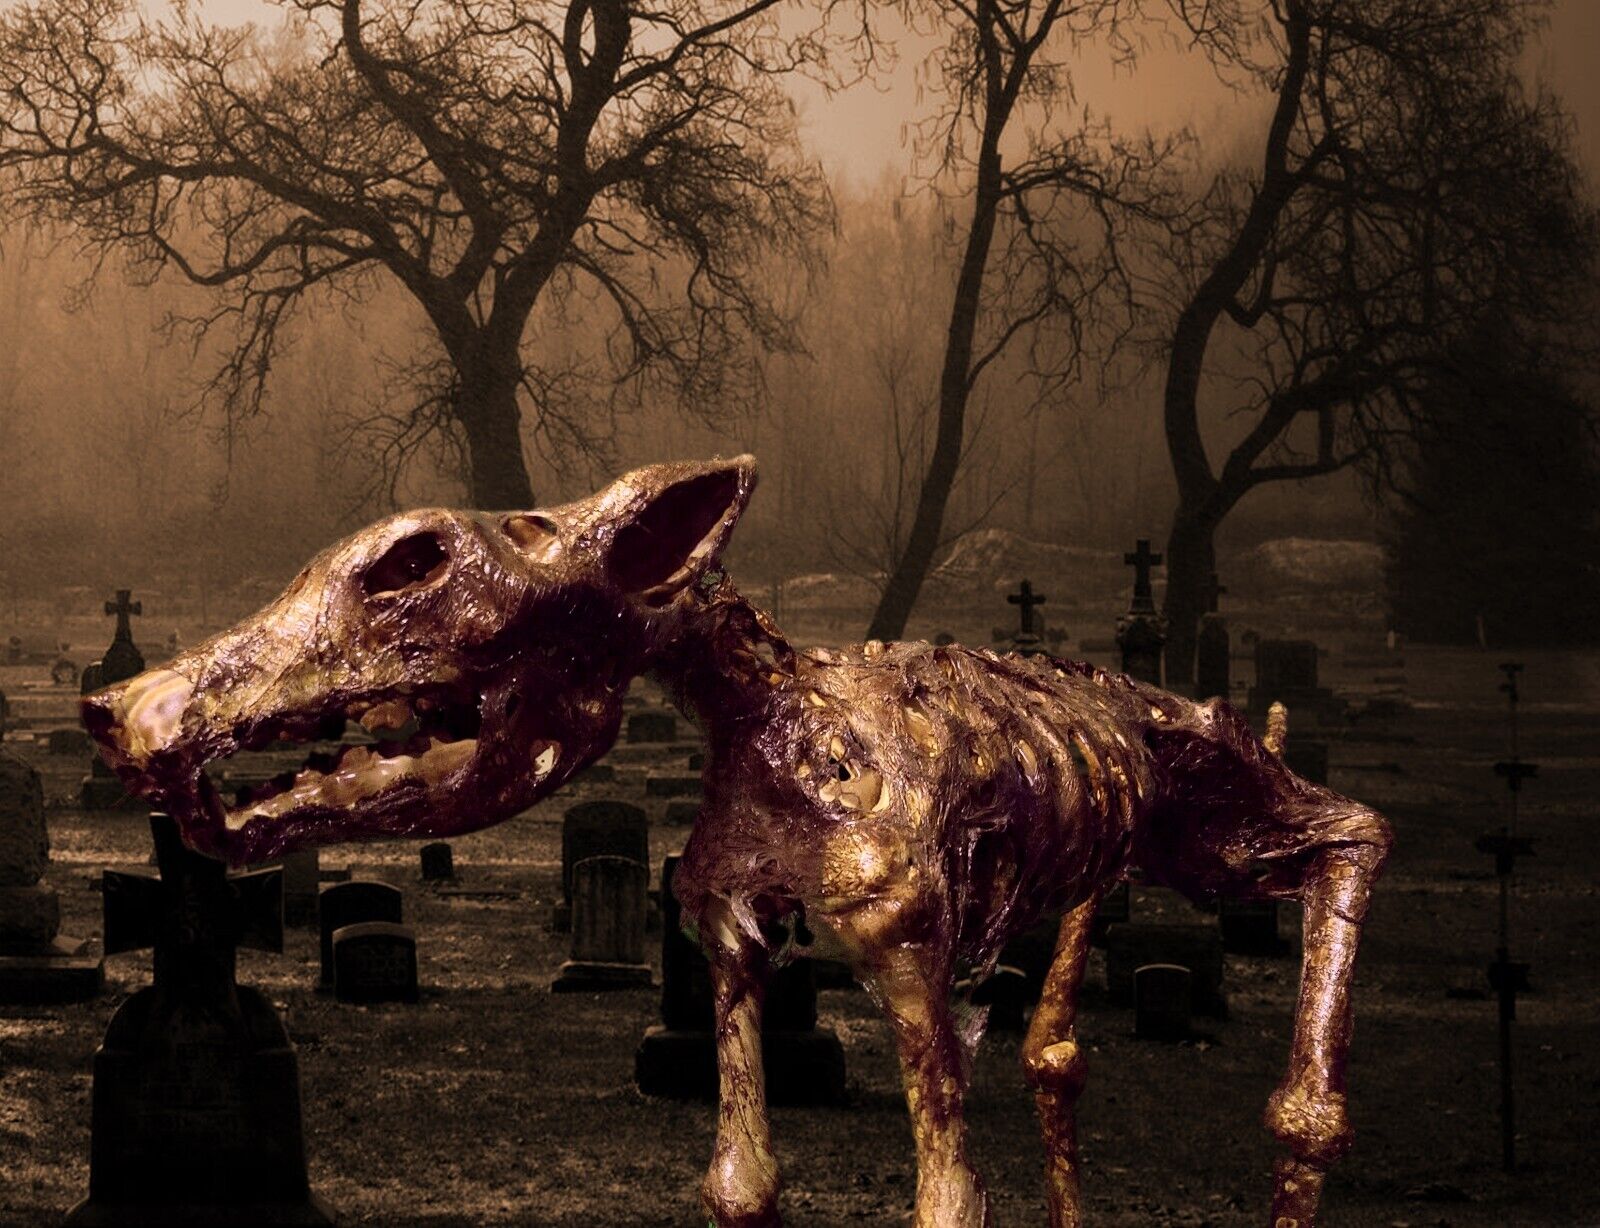 Decayed Corpse Skeleton Zombie Dog with Motion Activated Sound and Red LED Eyes